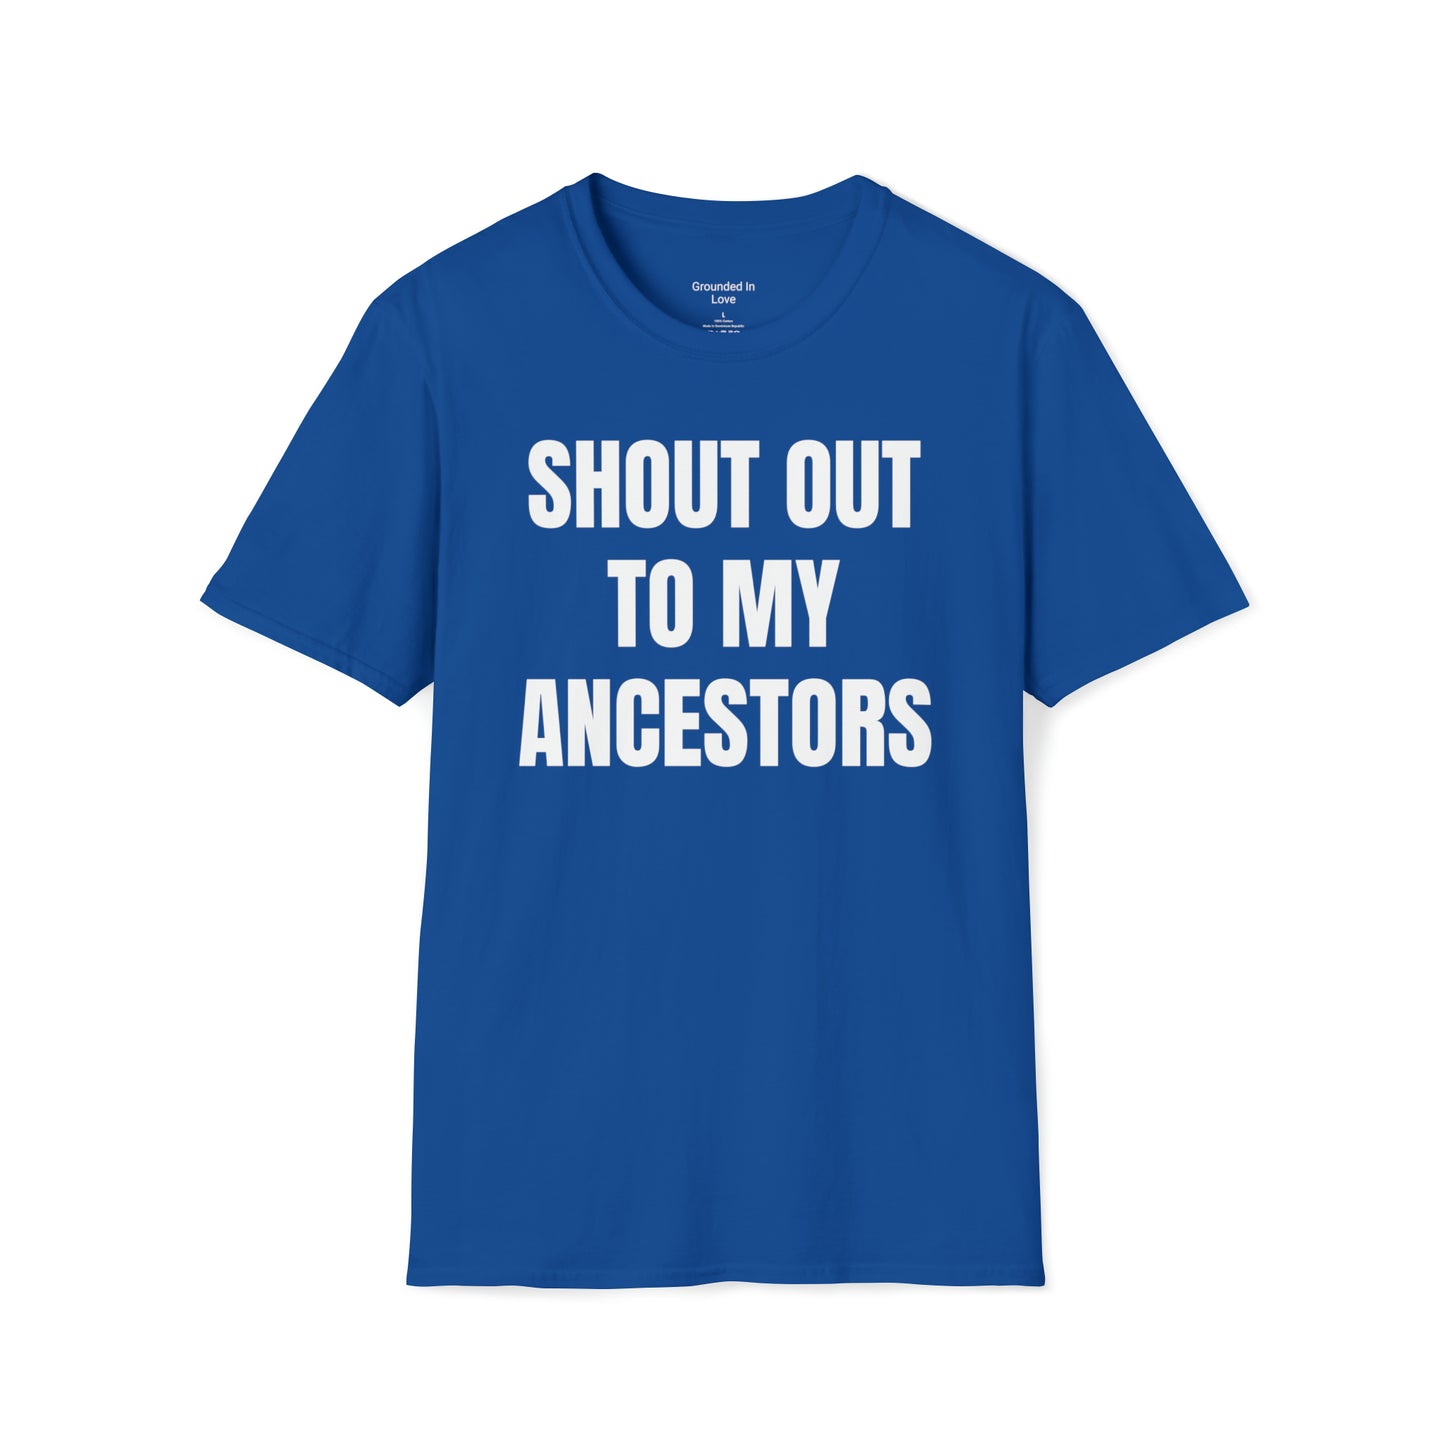 Shout Out To My Ancestors Shirt